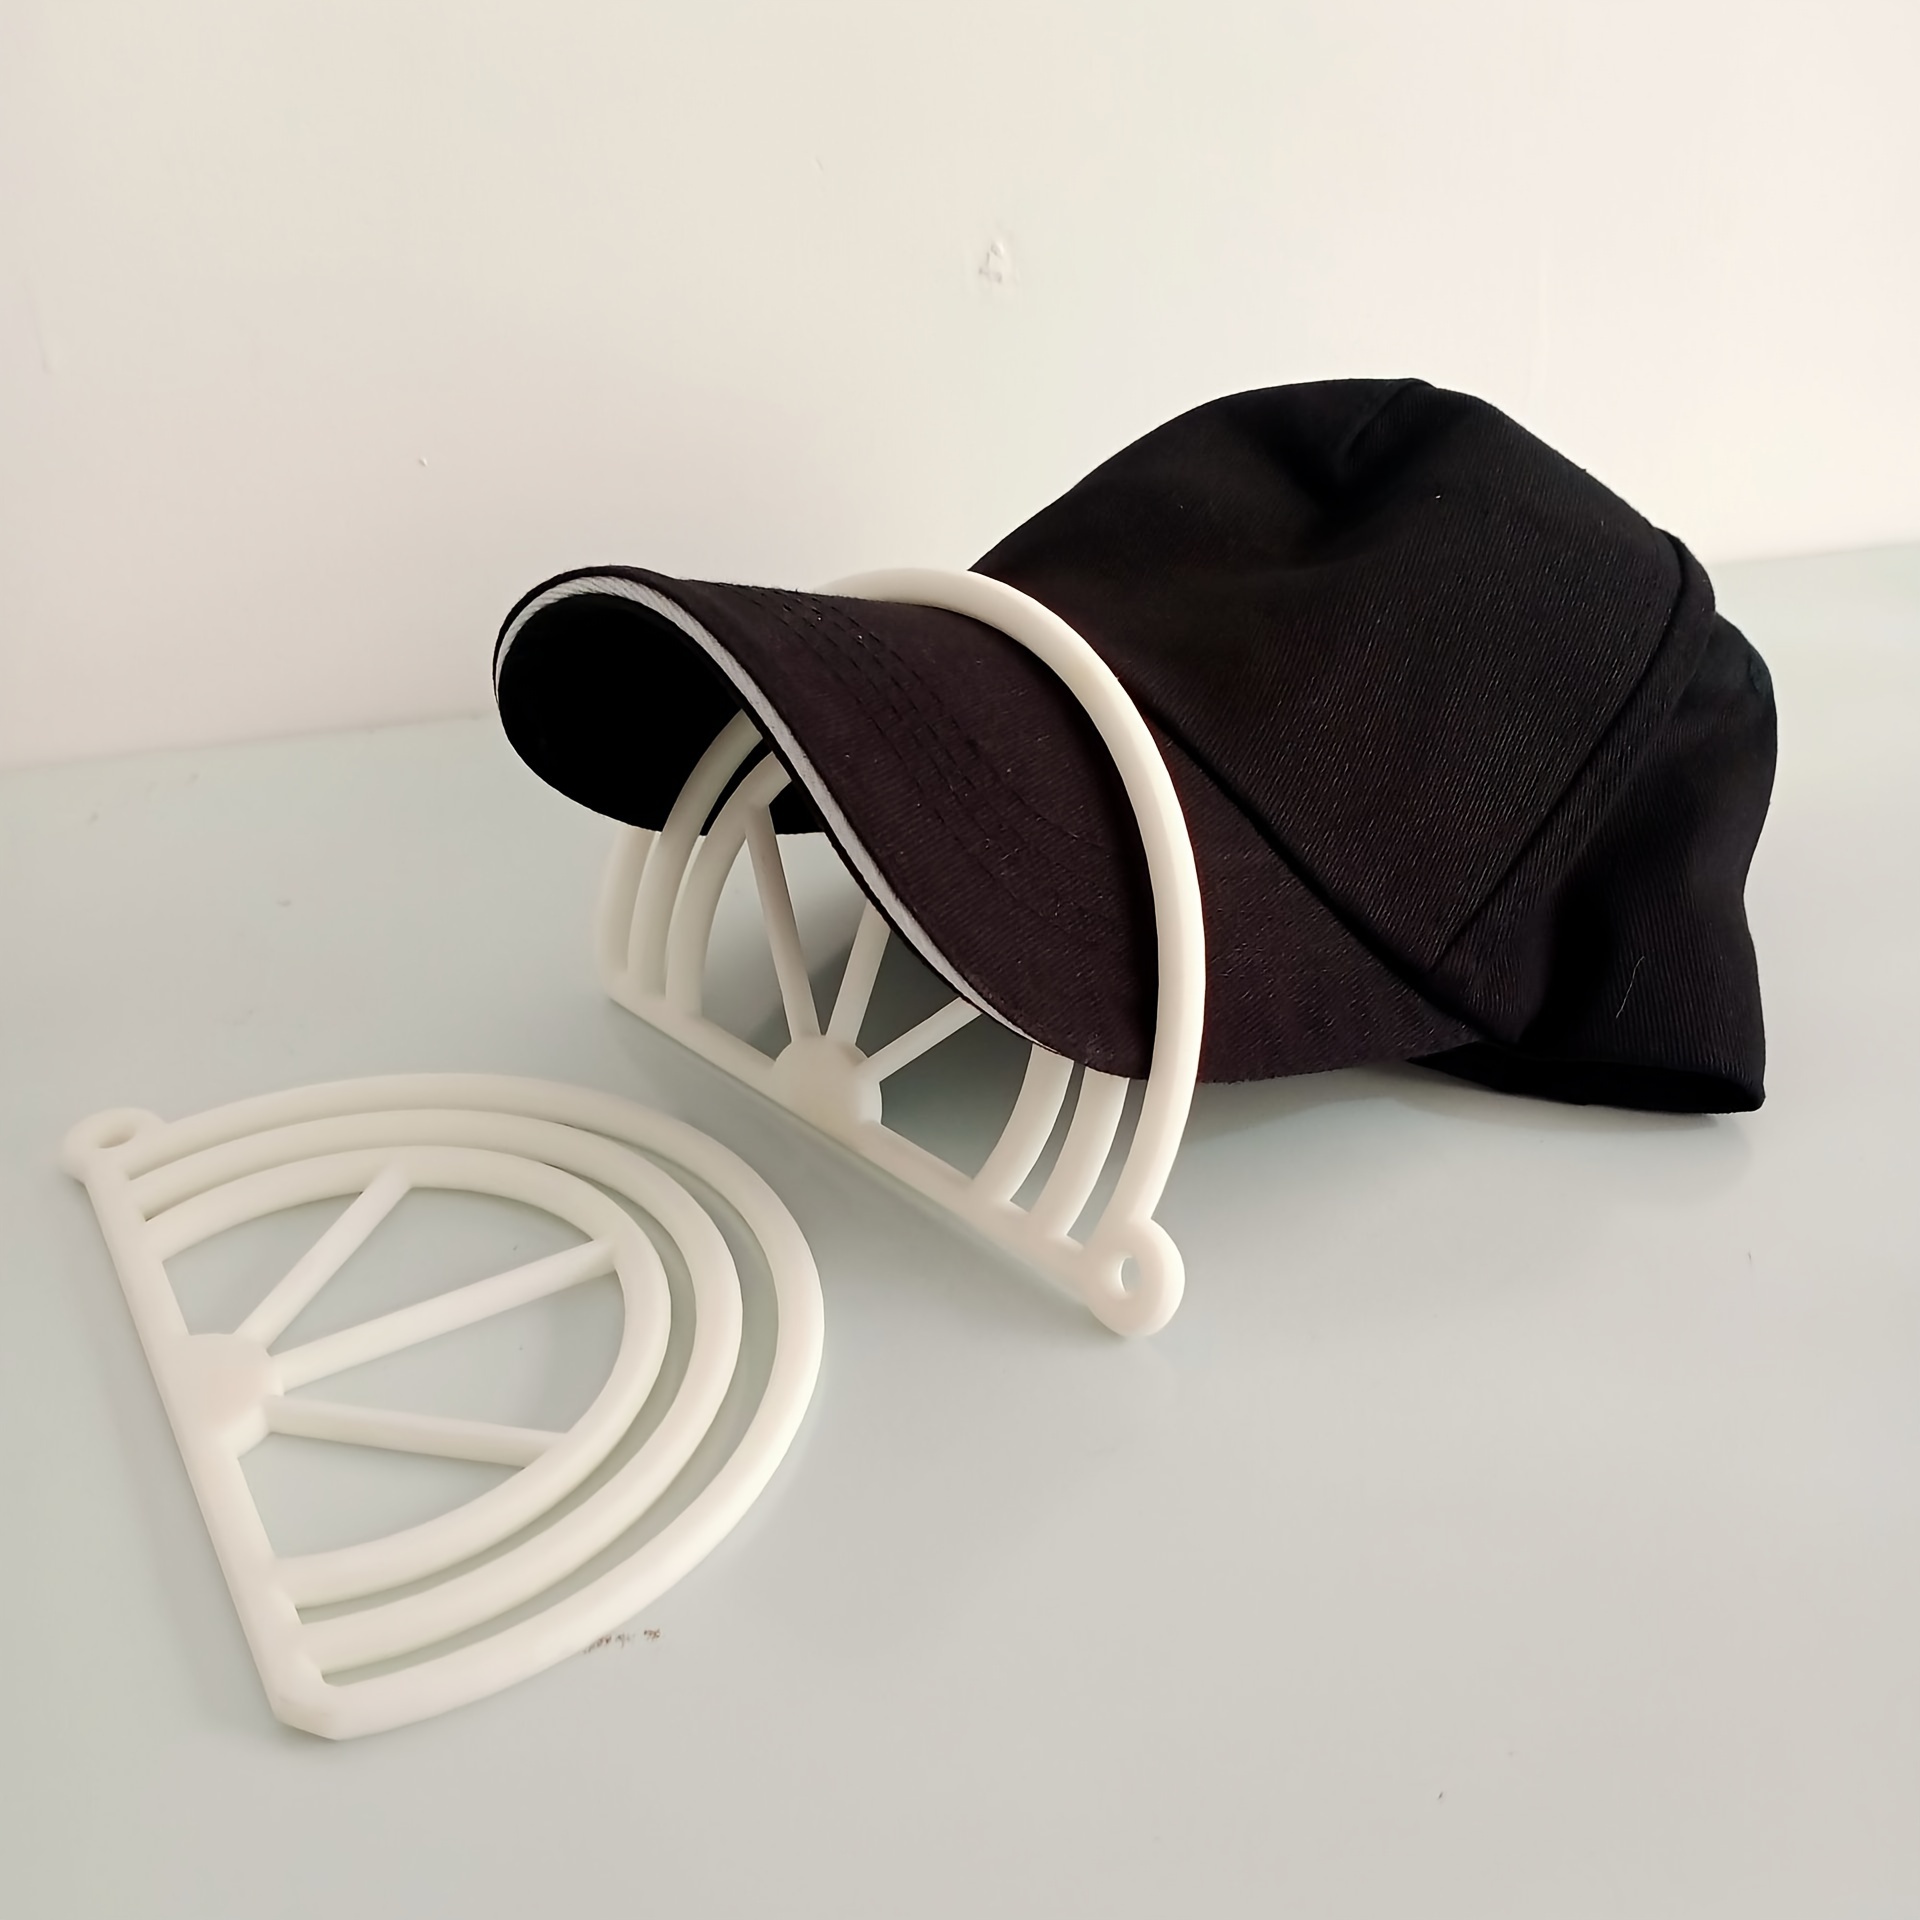 Hat Brim Bender Perfect Hat Curving Band No Steaming Required - Convenient  Shaper Design with Dual Option Hat Bill Bender Slots